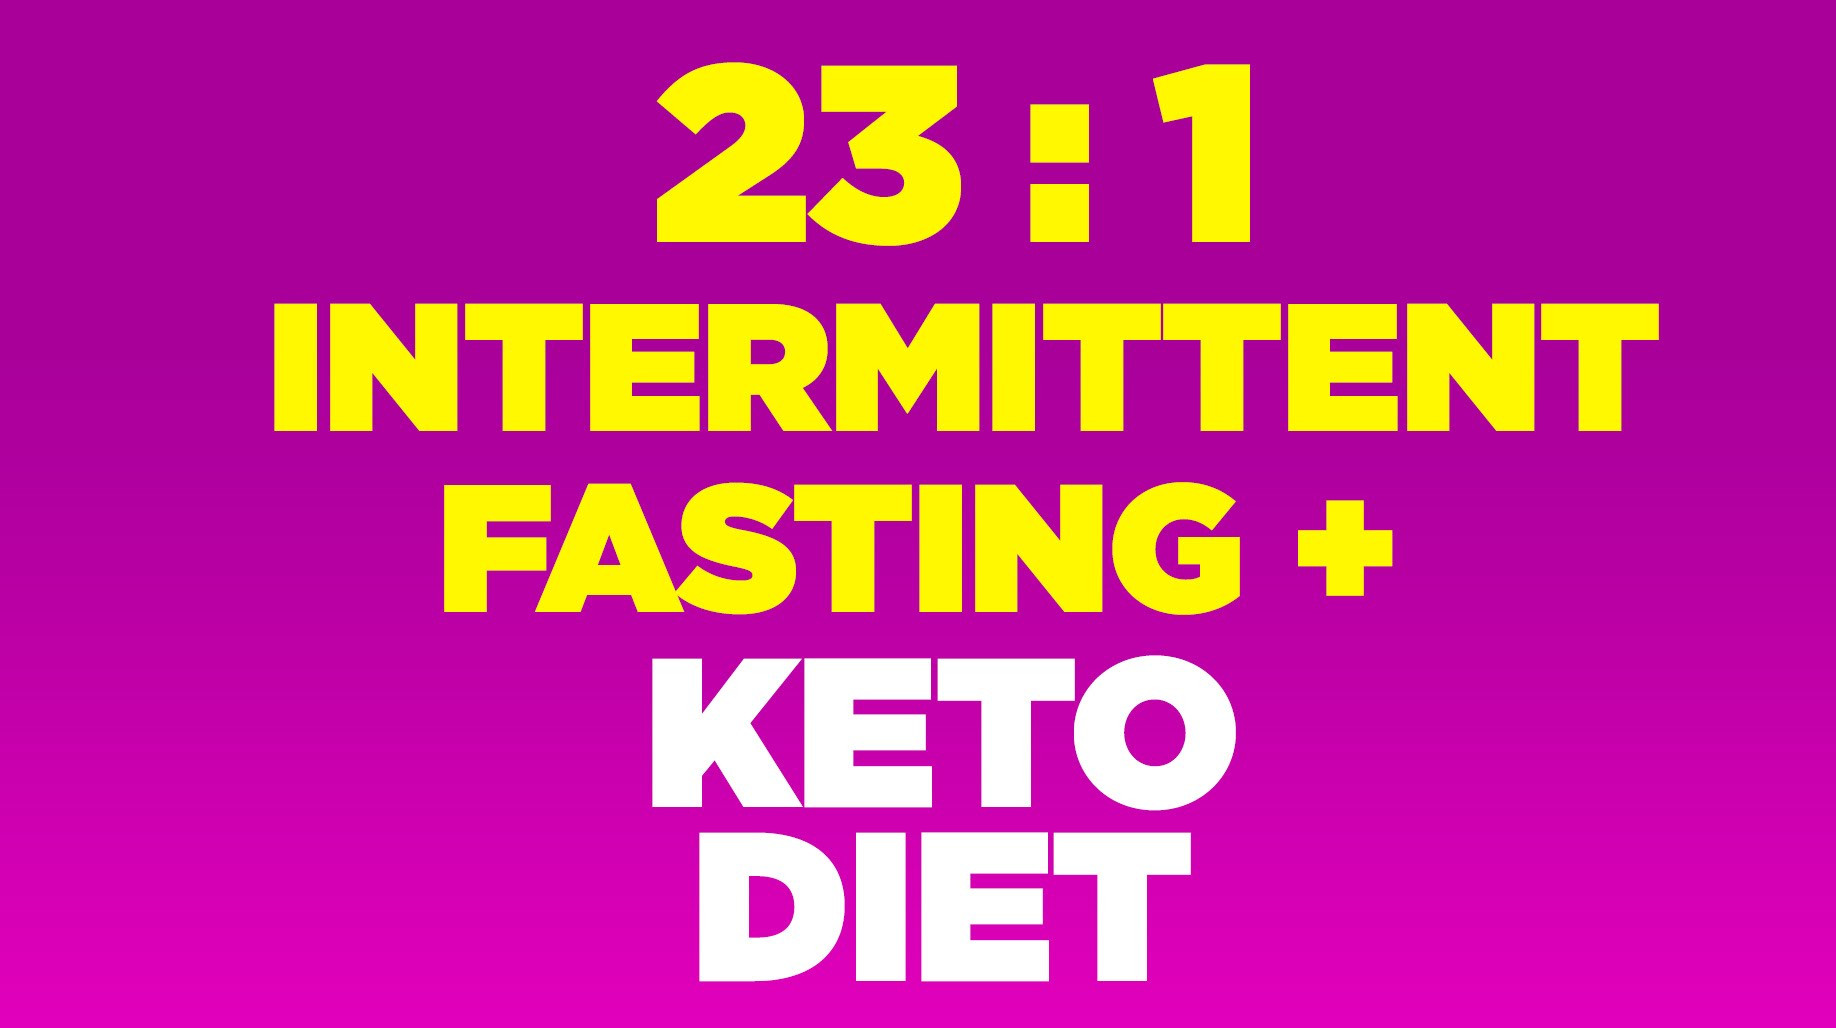 Keto Diet Intermittent Fasting
 30 DAYS OF 23 HOURS Intermittent Fasting 23 1